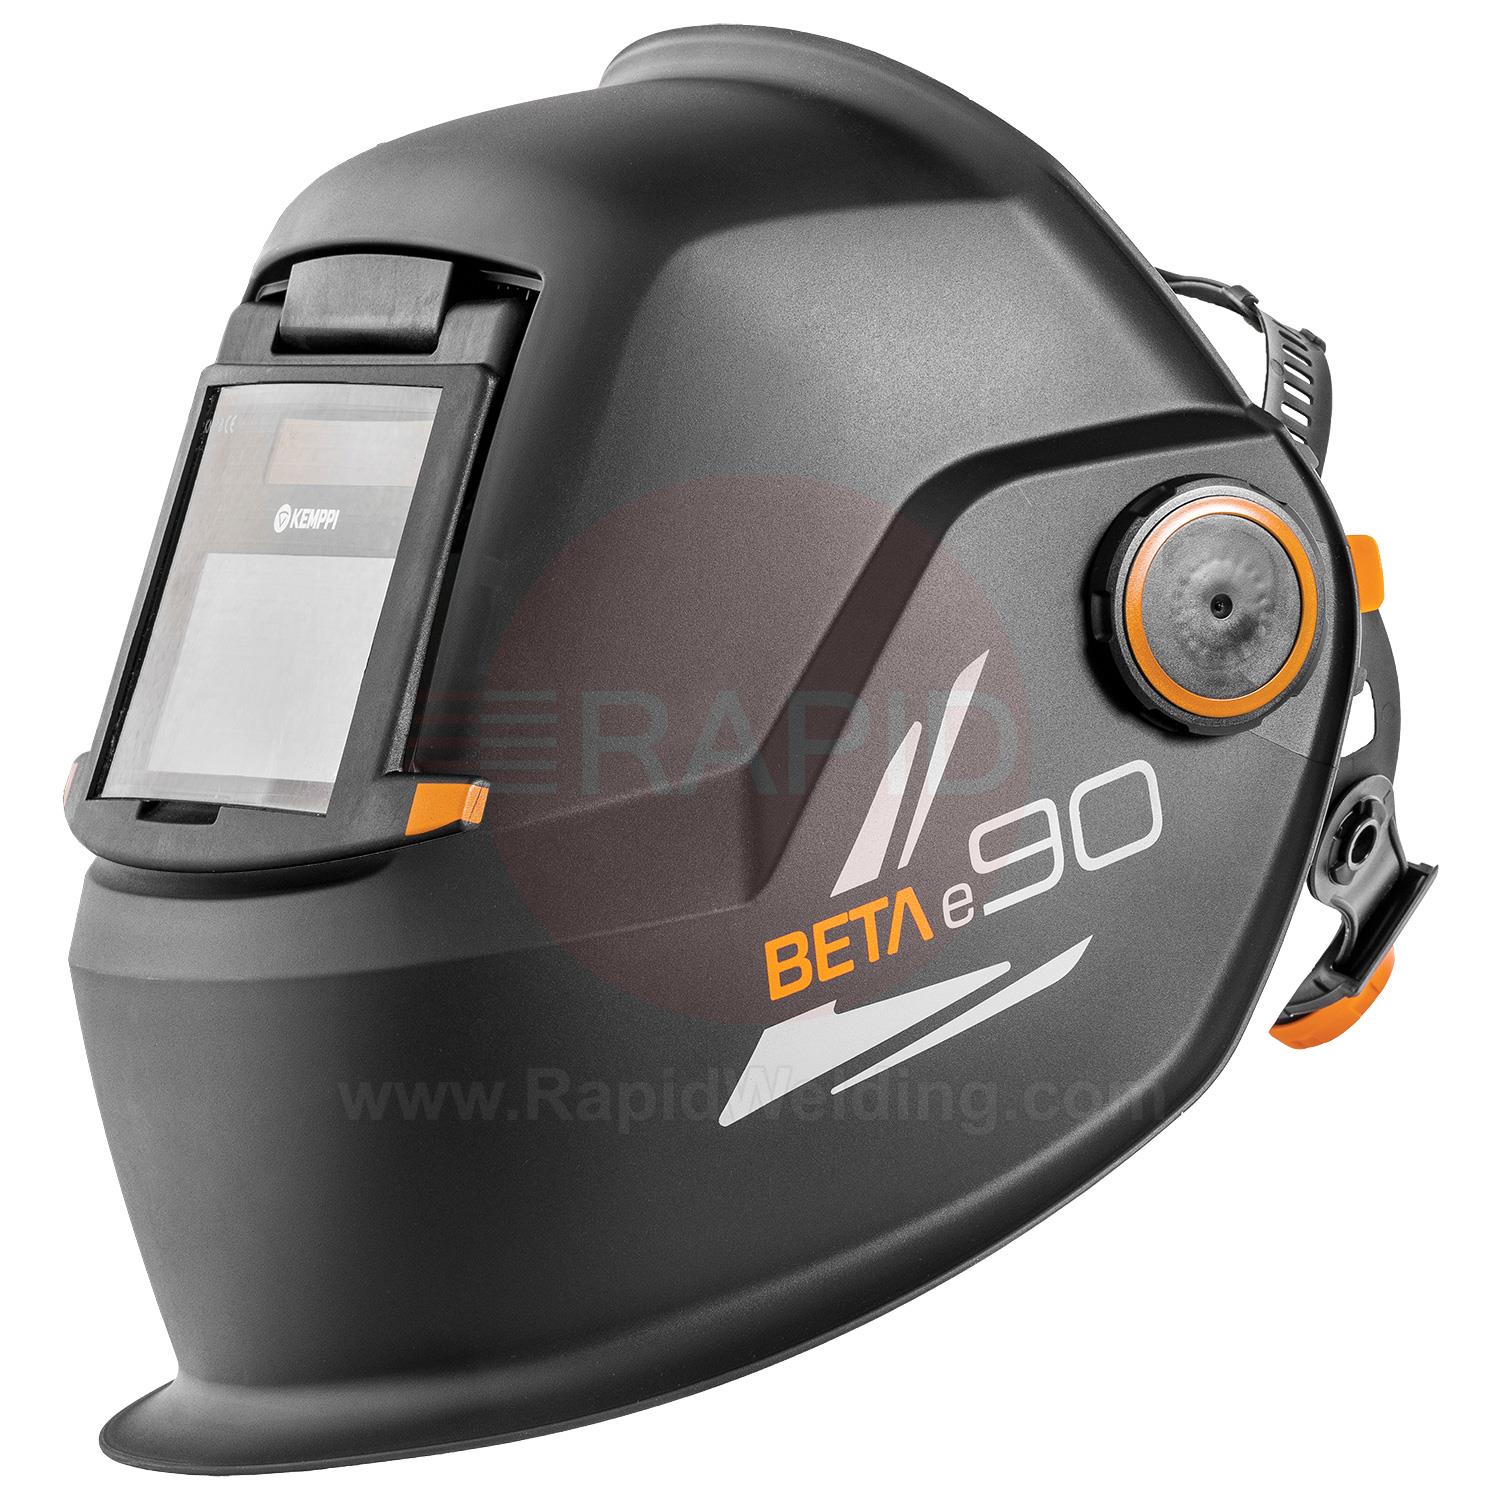 9873024  Kemppi Beta e90X Welding Helmet, with Variable Shade 9-15 ADF and Flip Front for Grinding